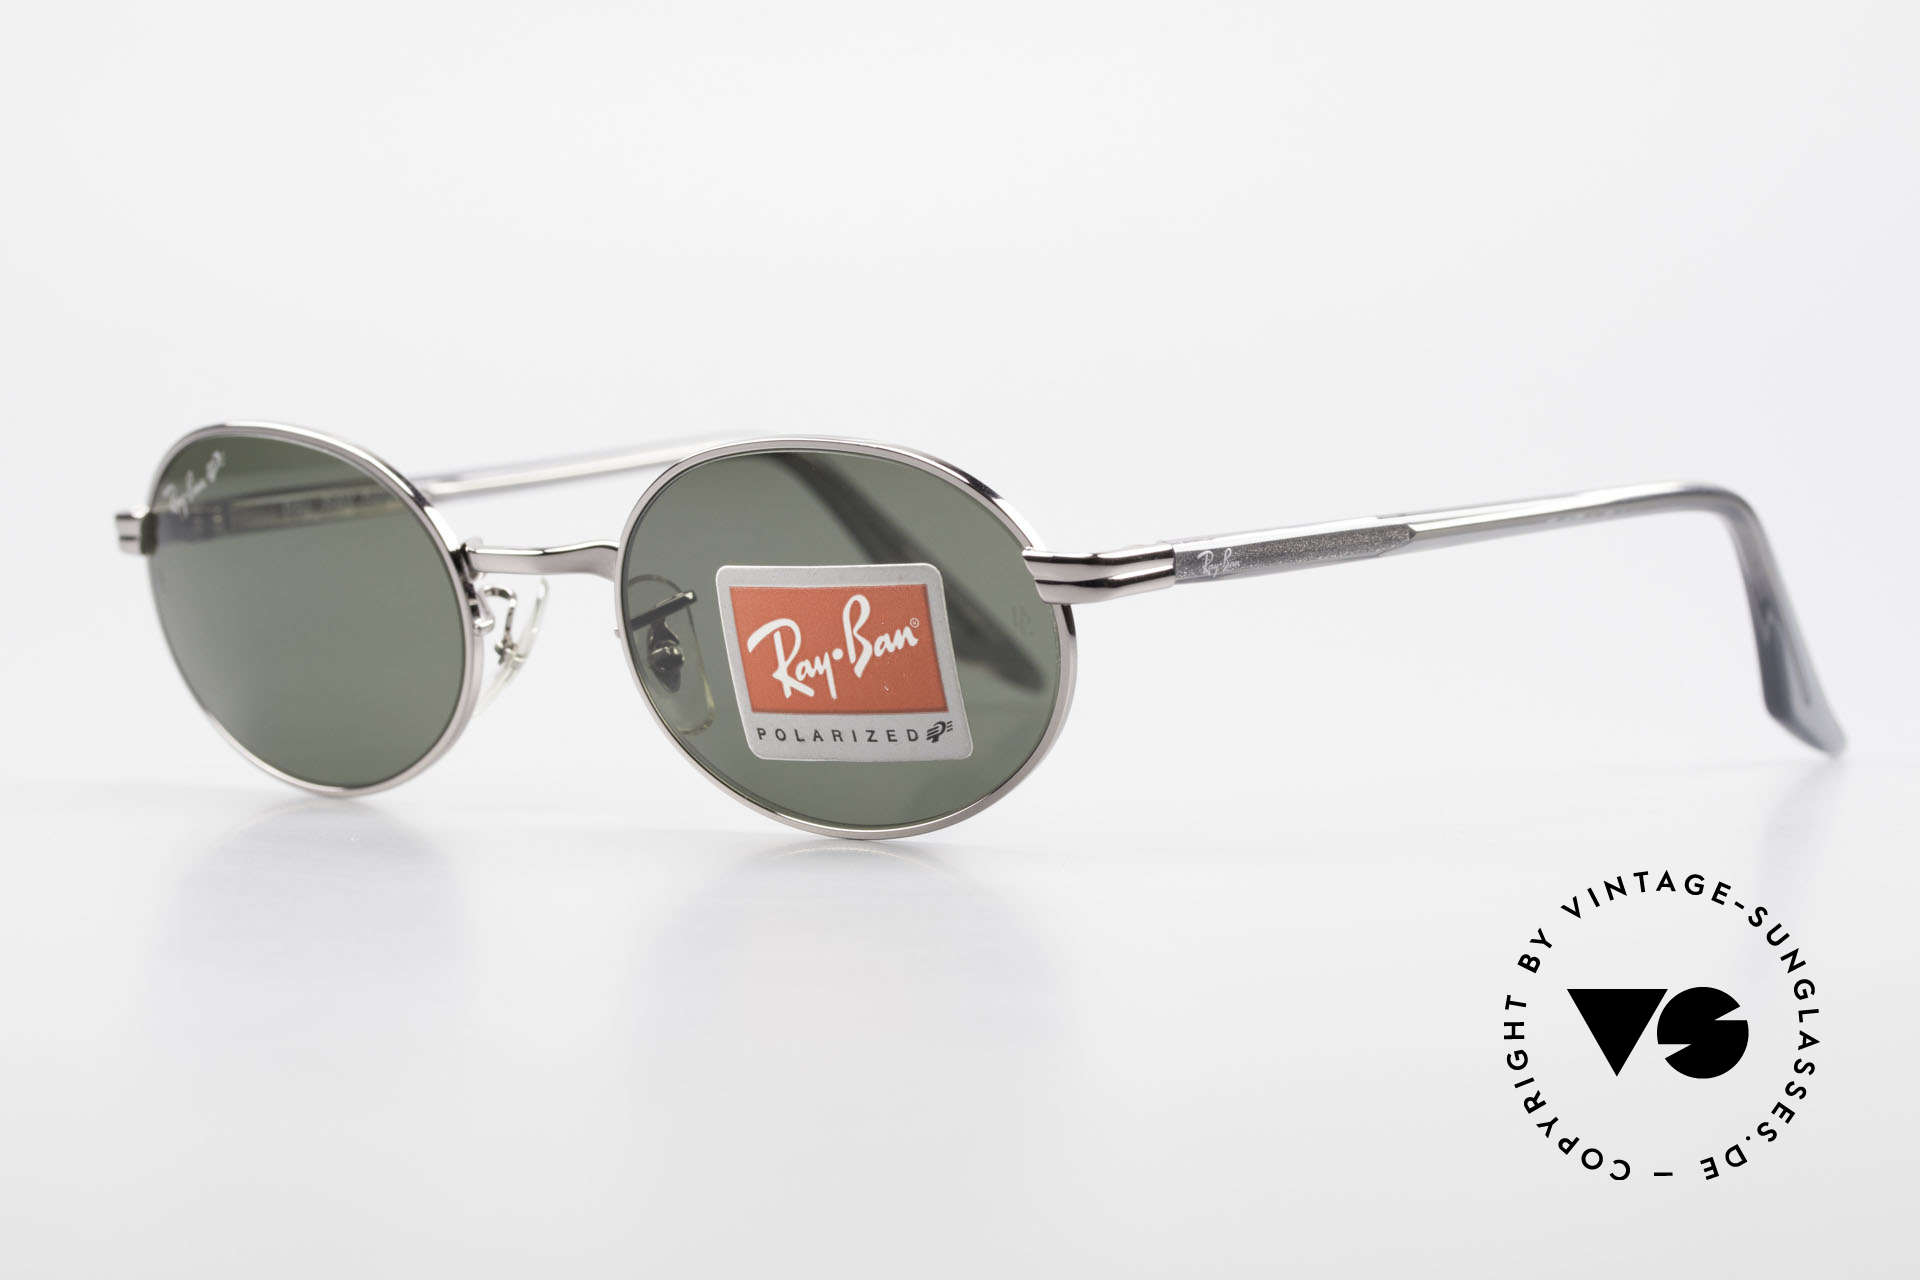 Ray Ban Sidestreet Diner Oval Polarized USA B&L Sunglasses, in 1999, B&L sold the brand "RAY-BAN" to Luxottica, Made for Men and Women